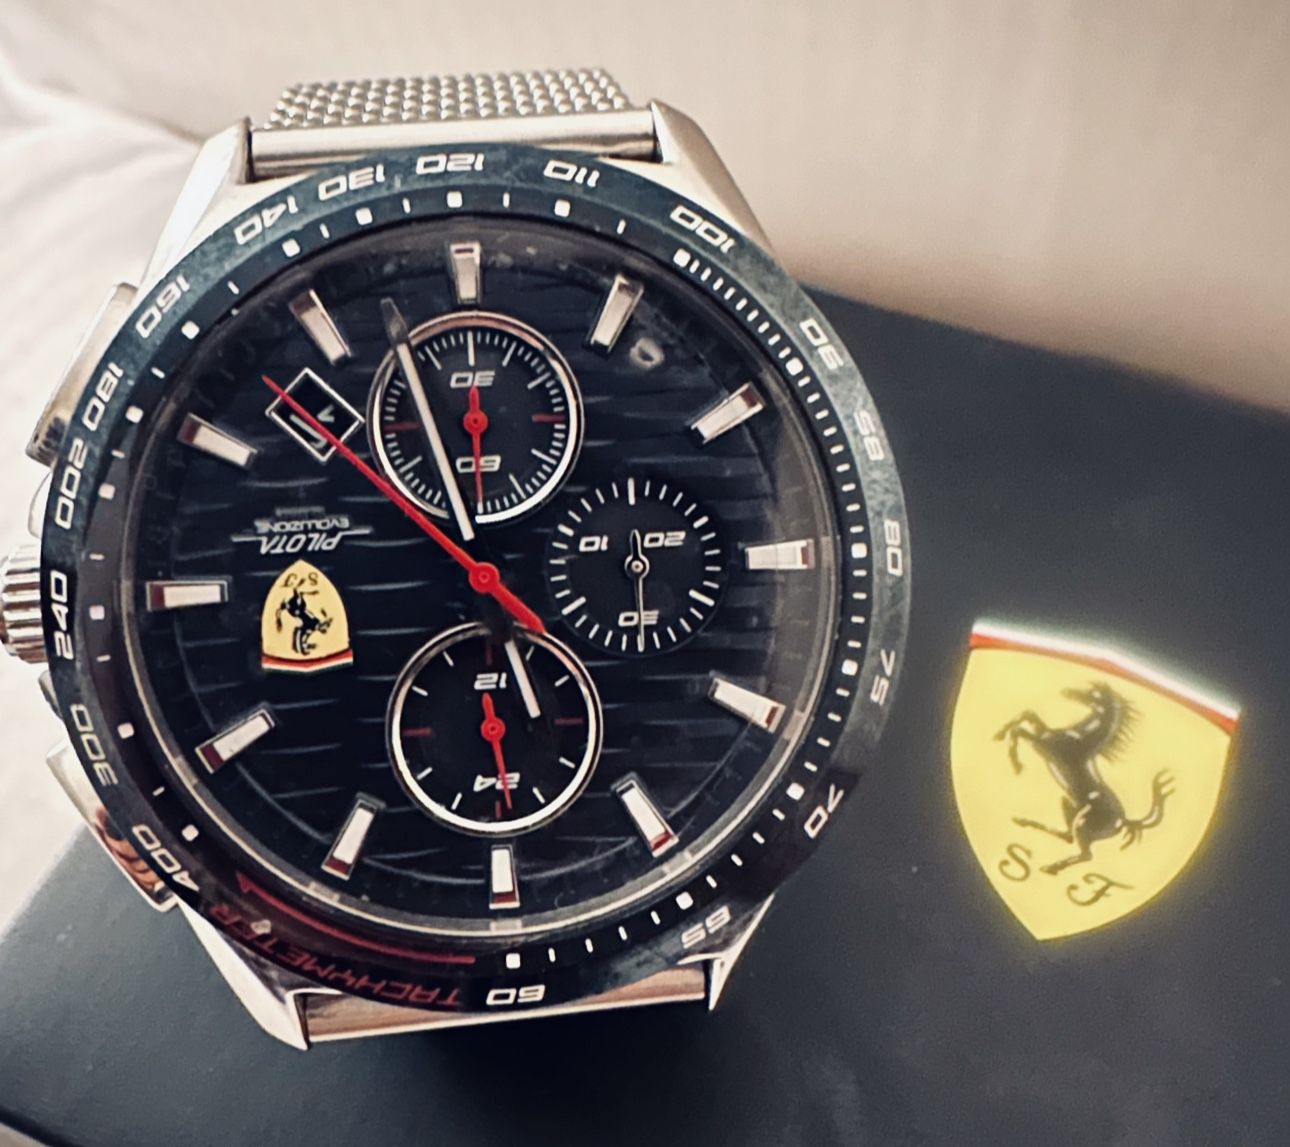 Ferrari 2 Bands Watch With Box for Sale in Federal Way, WA - OfferUp